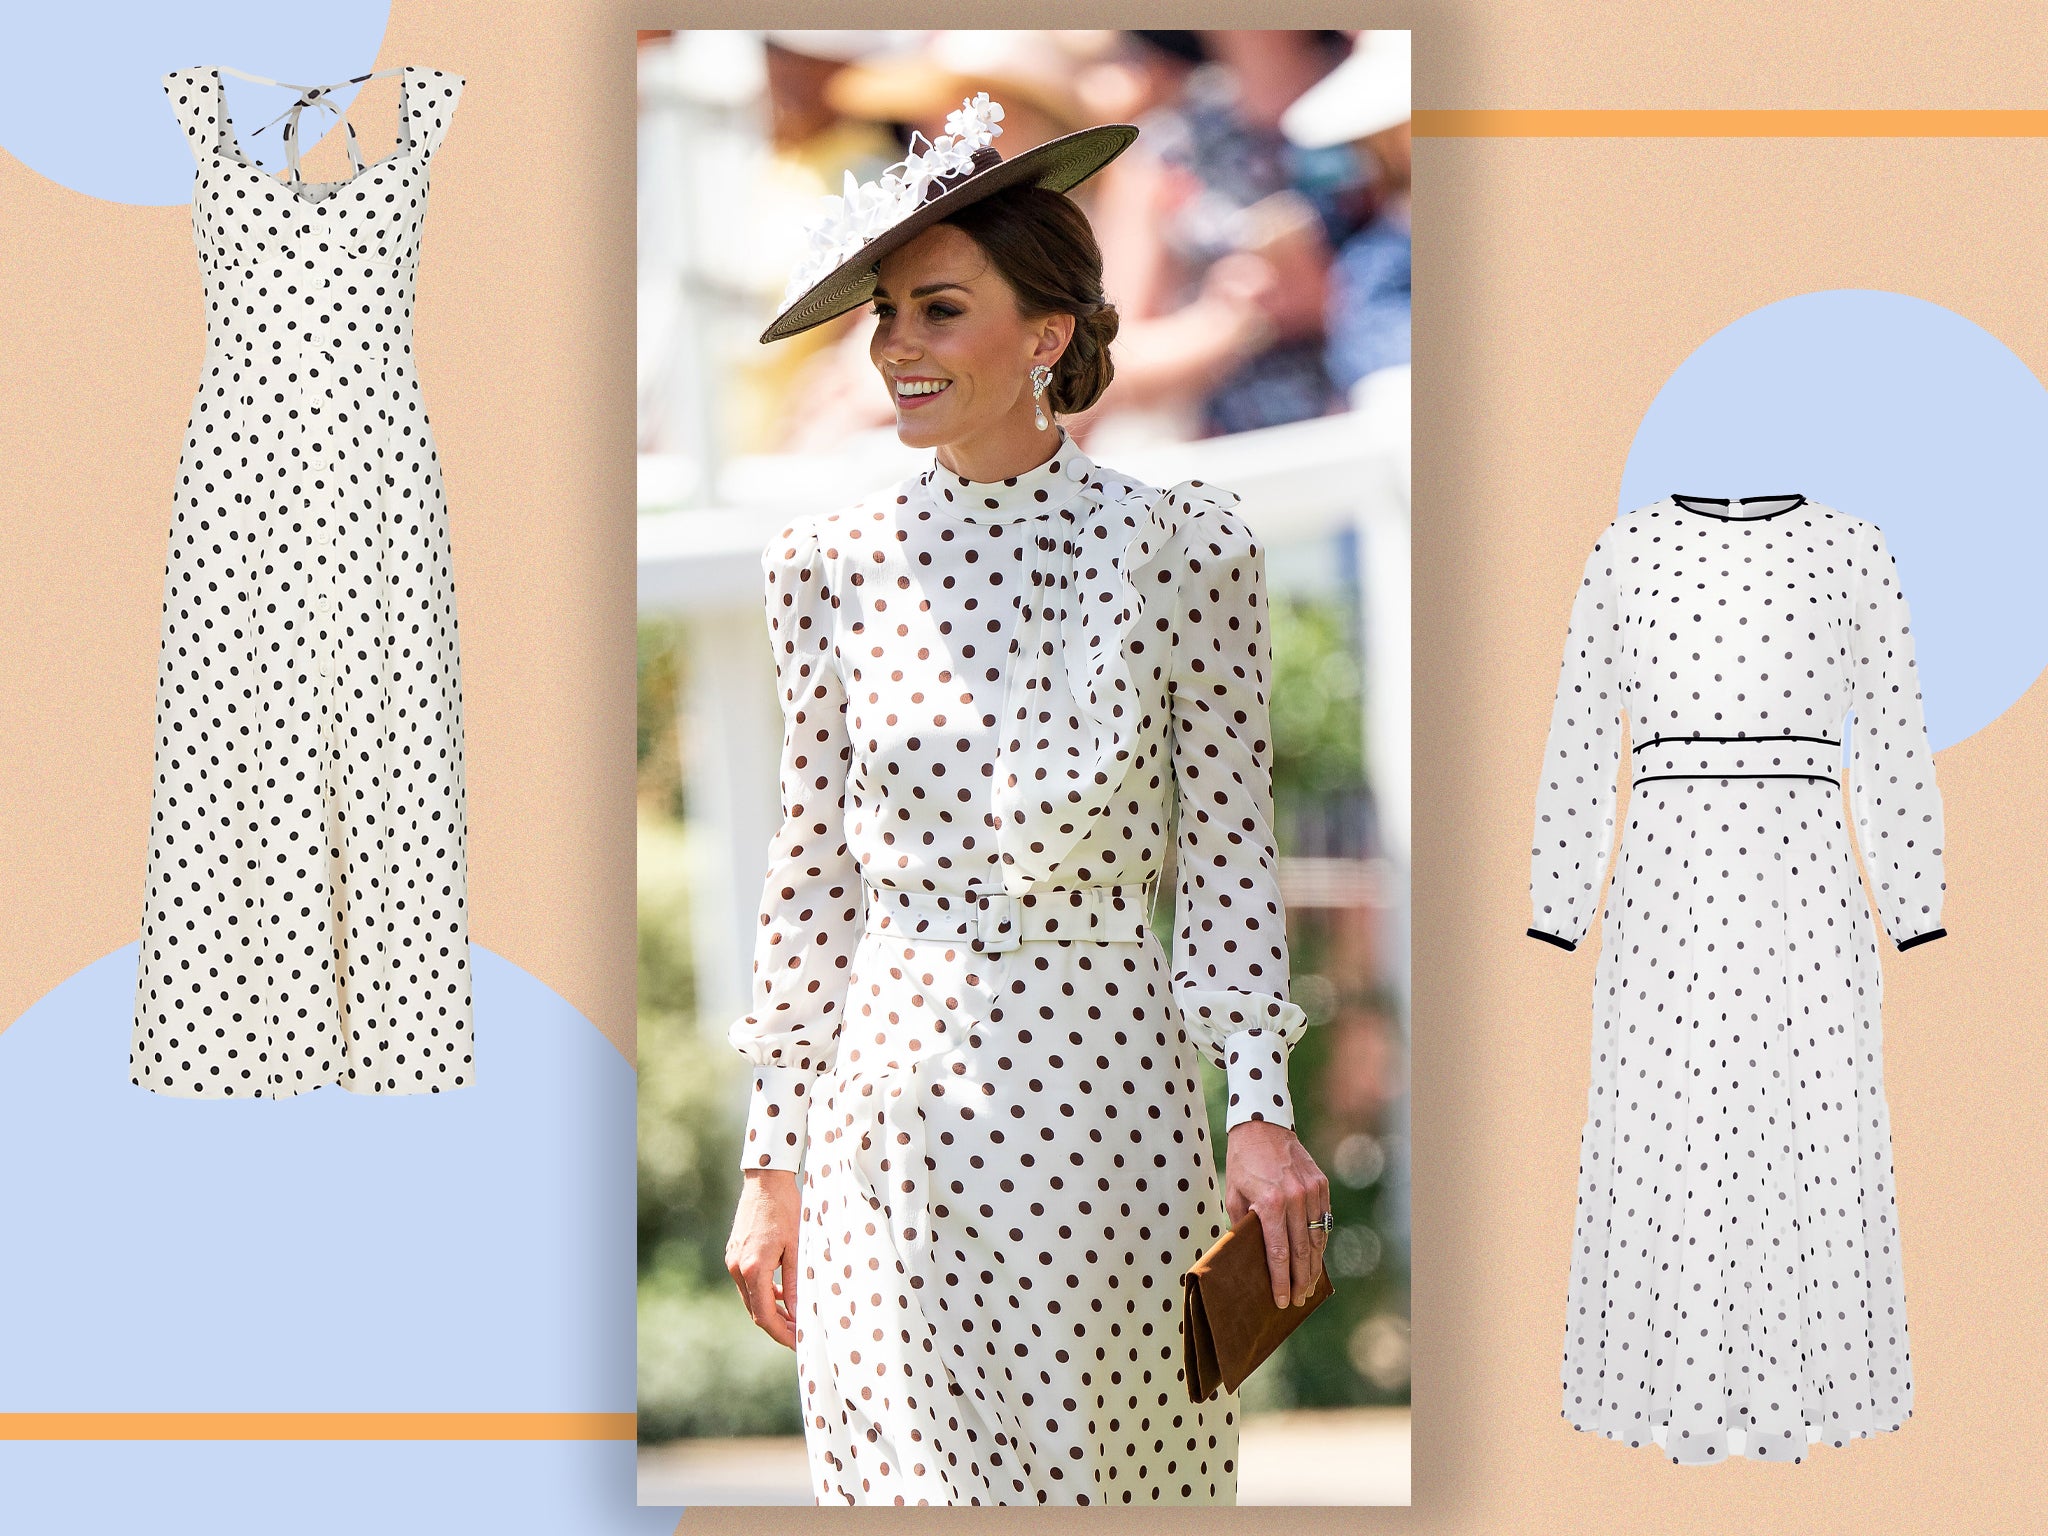 Kate Middletons Dress Today At Ascot Dupes For The Alessandra Rich Polka Dot Midi The 